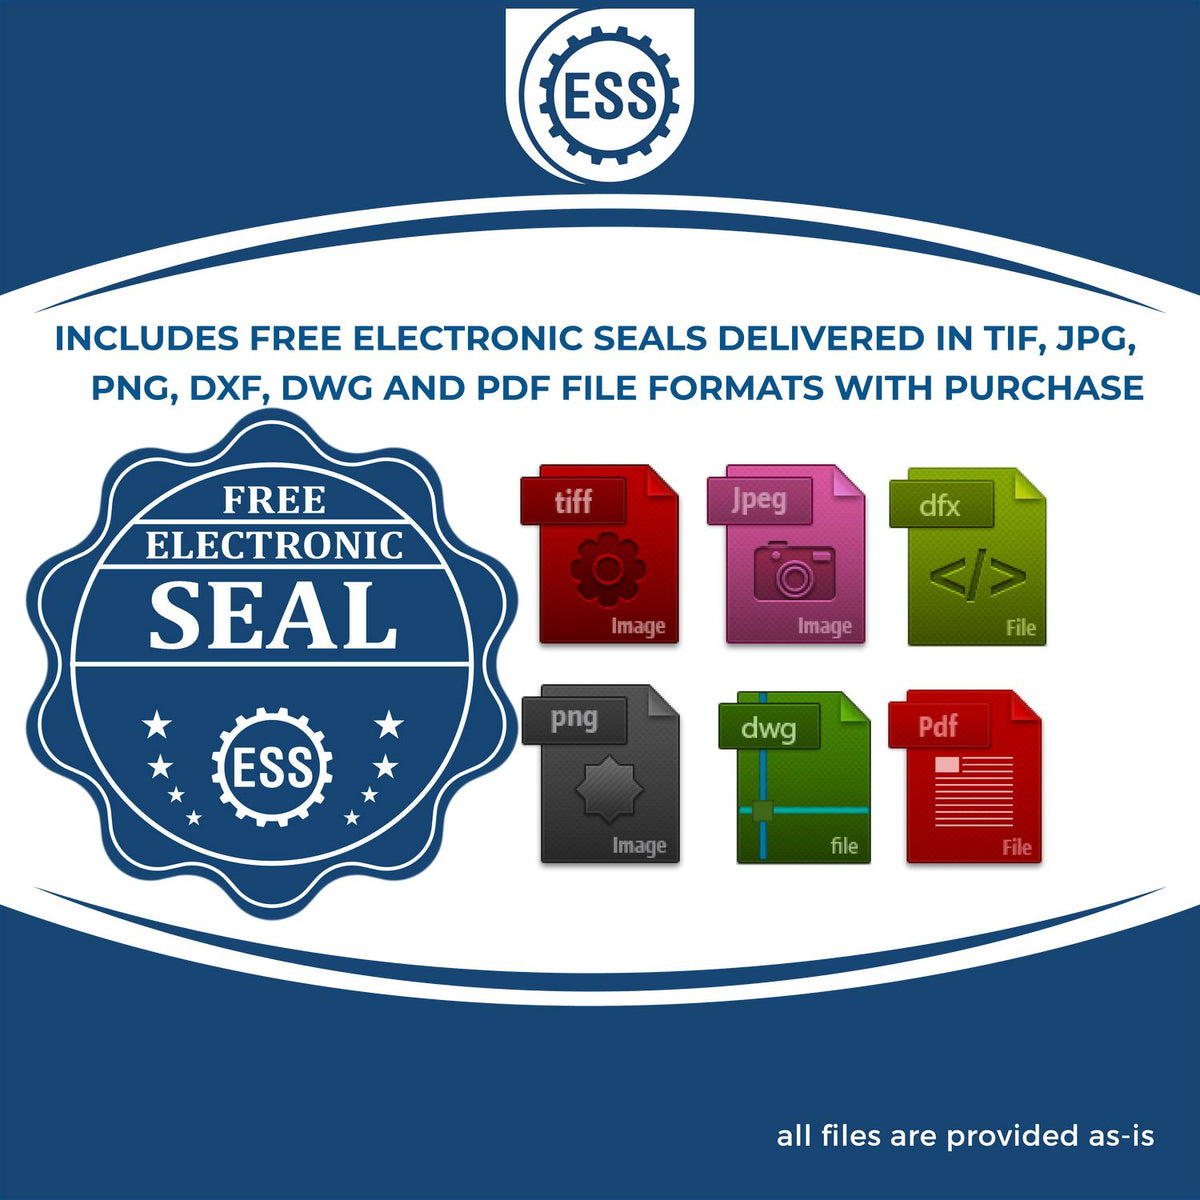 An infographic for the free electronic seal for the Gift Arizona Land Surveyor Seal illustrating the different file type icons such as DXF, DWG, TIF, JPG and PNG.